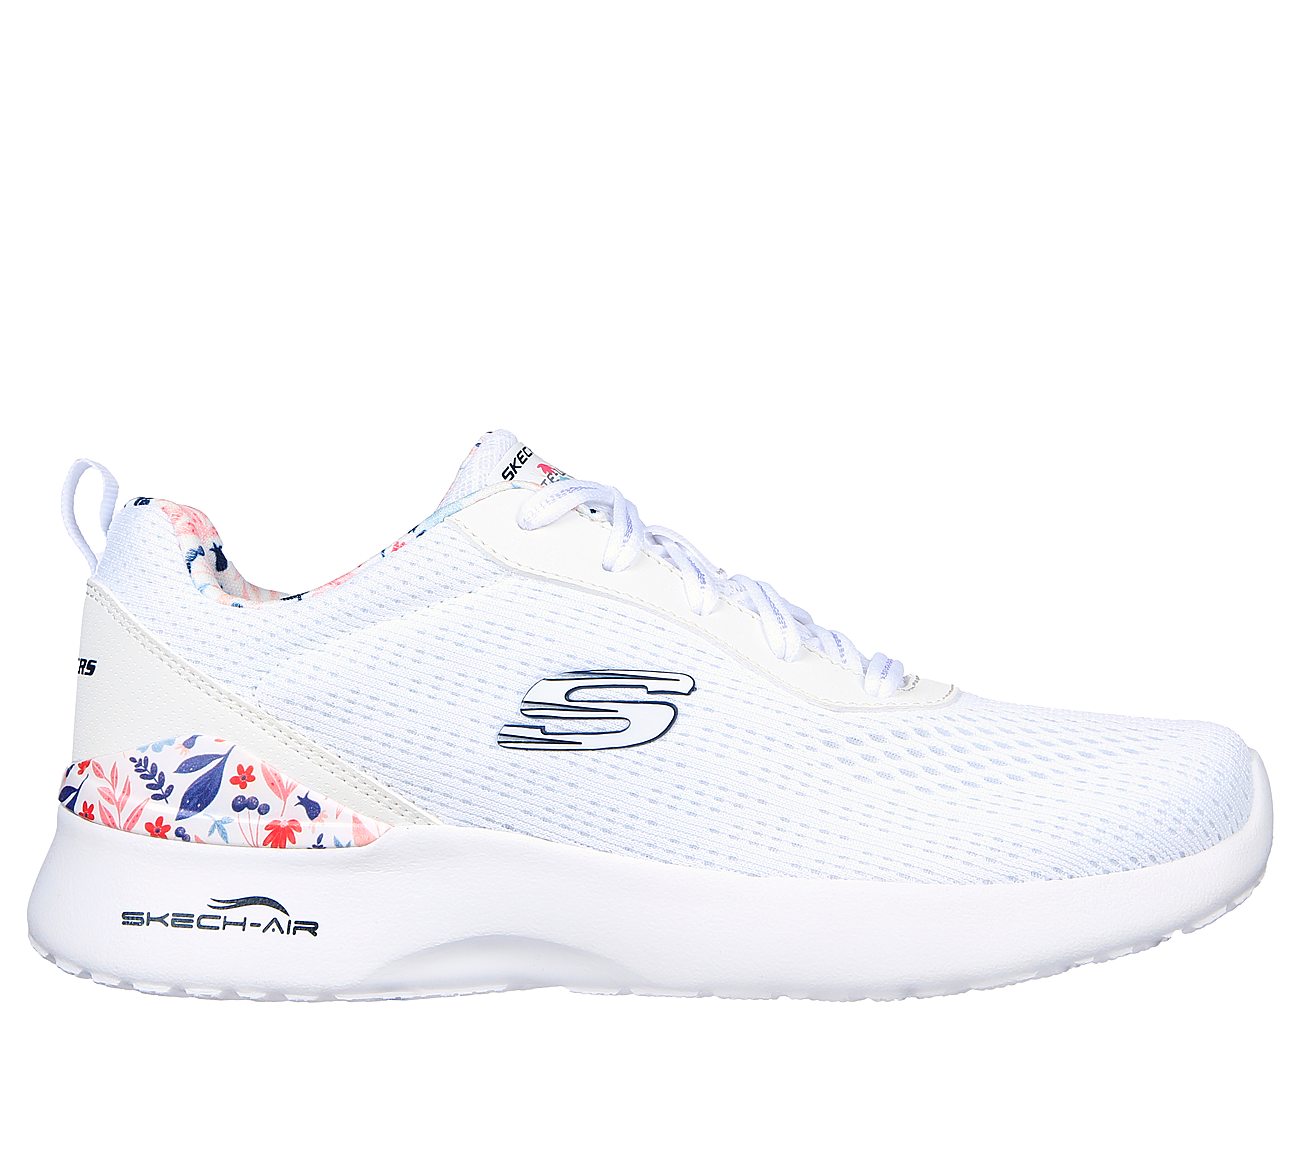 SKECH-AIR DYNAMIGHT-LAID OUT, WHITE/MULTI Footwear Lateral View